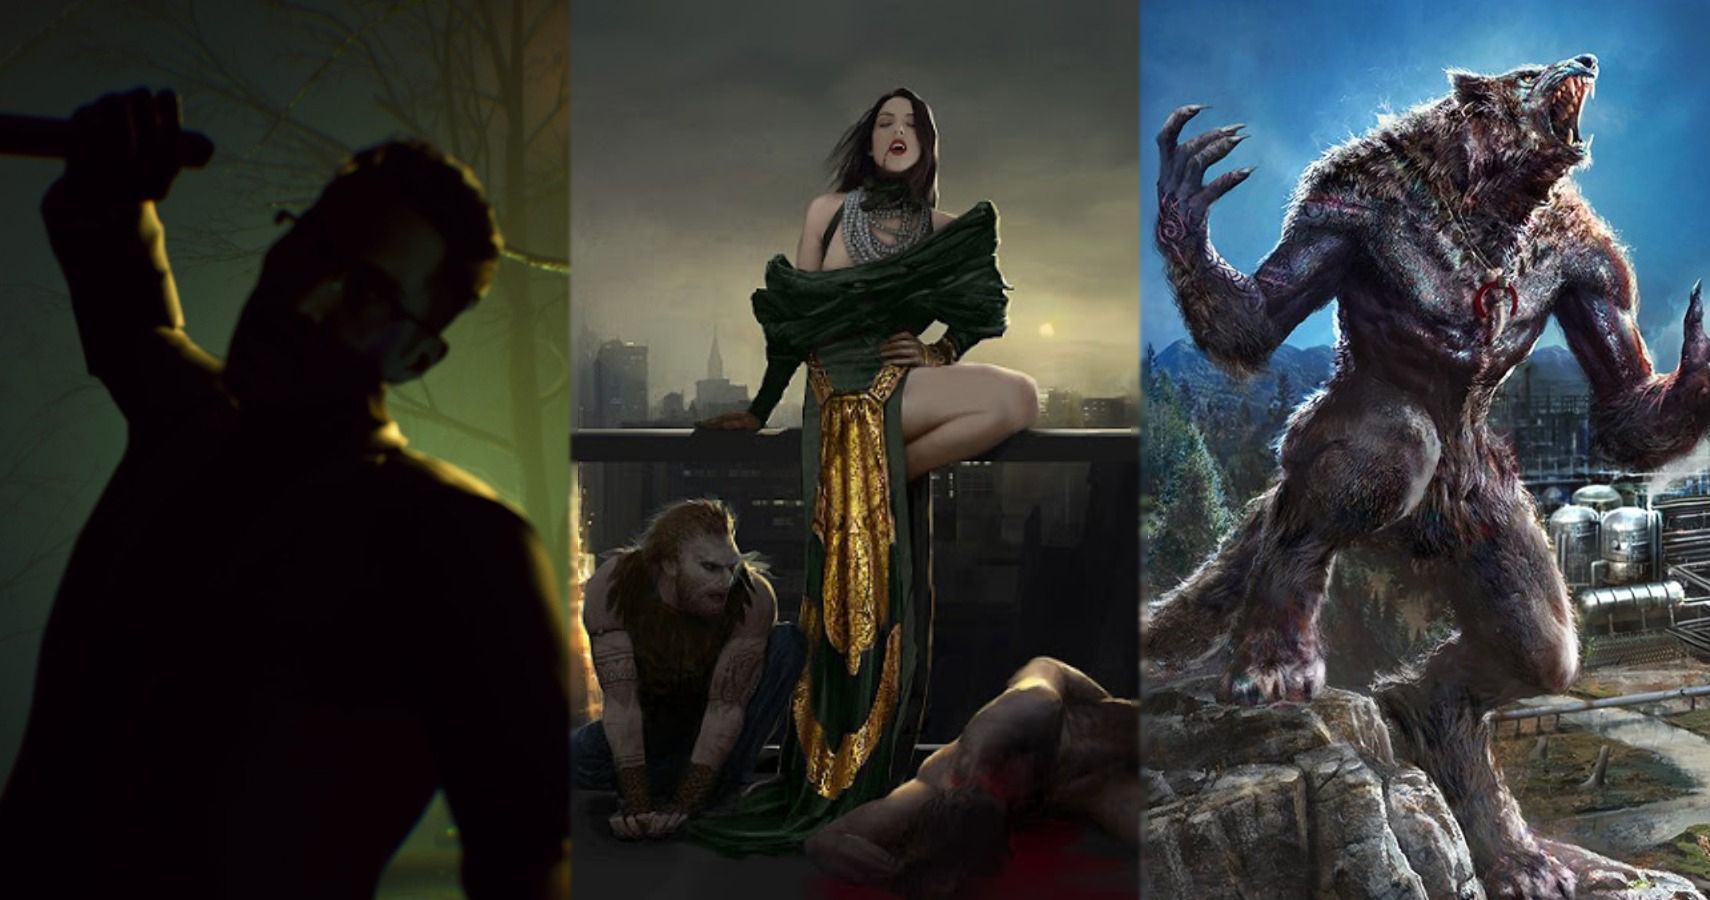 Vampire: The Masquerade Guide – Best Clans For New Players